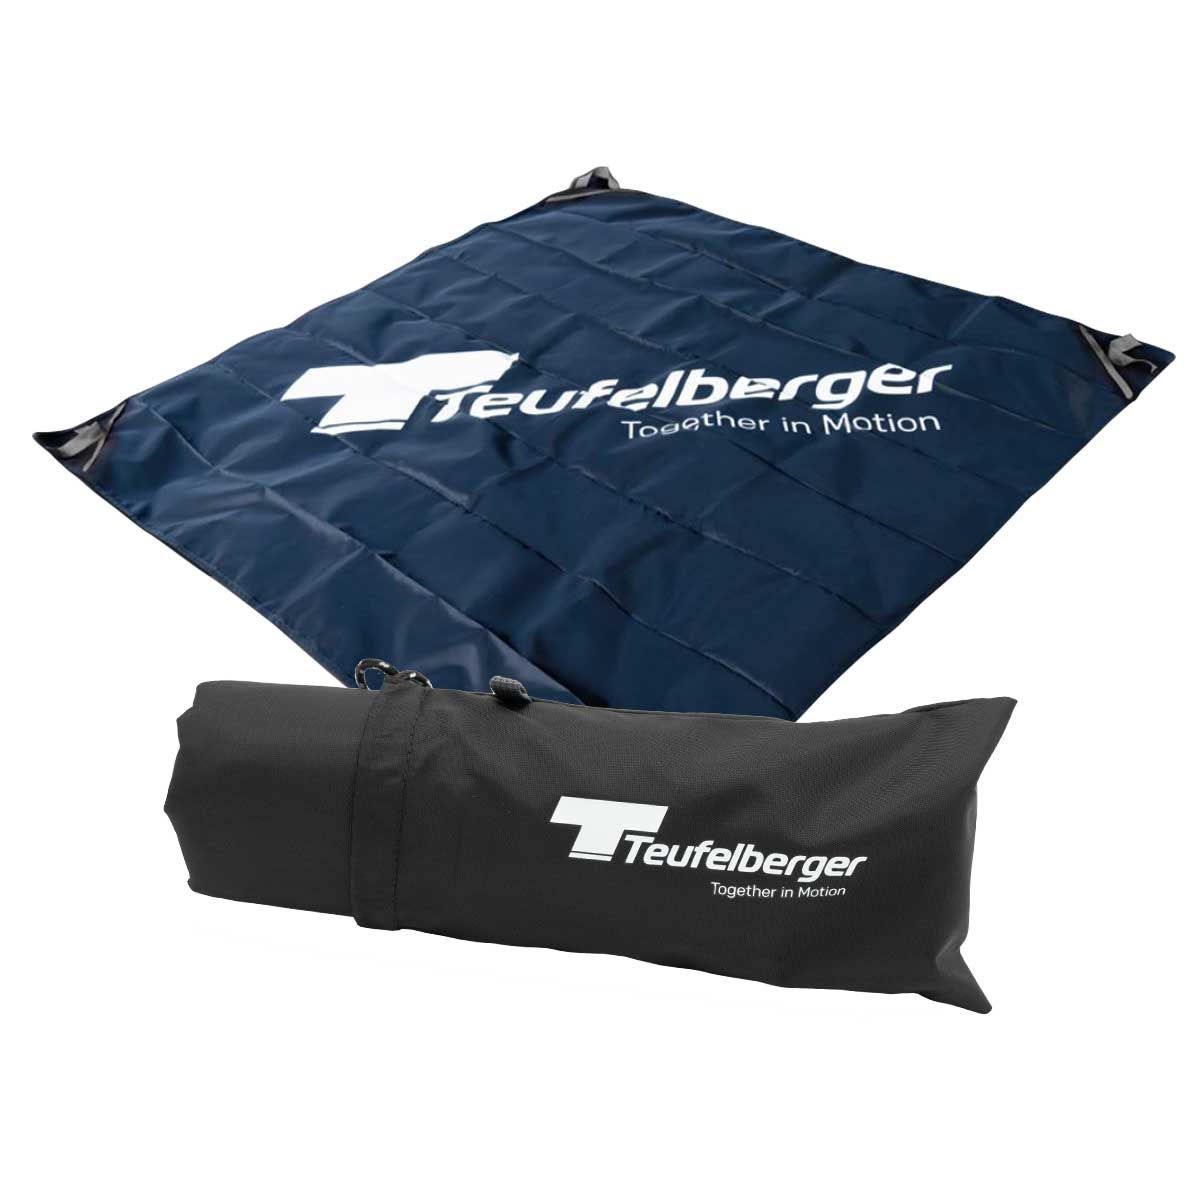 Rope tarp by Teufelberger